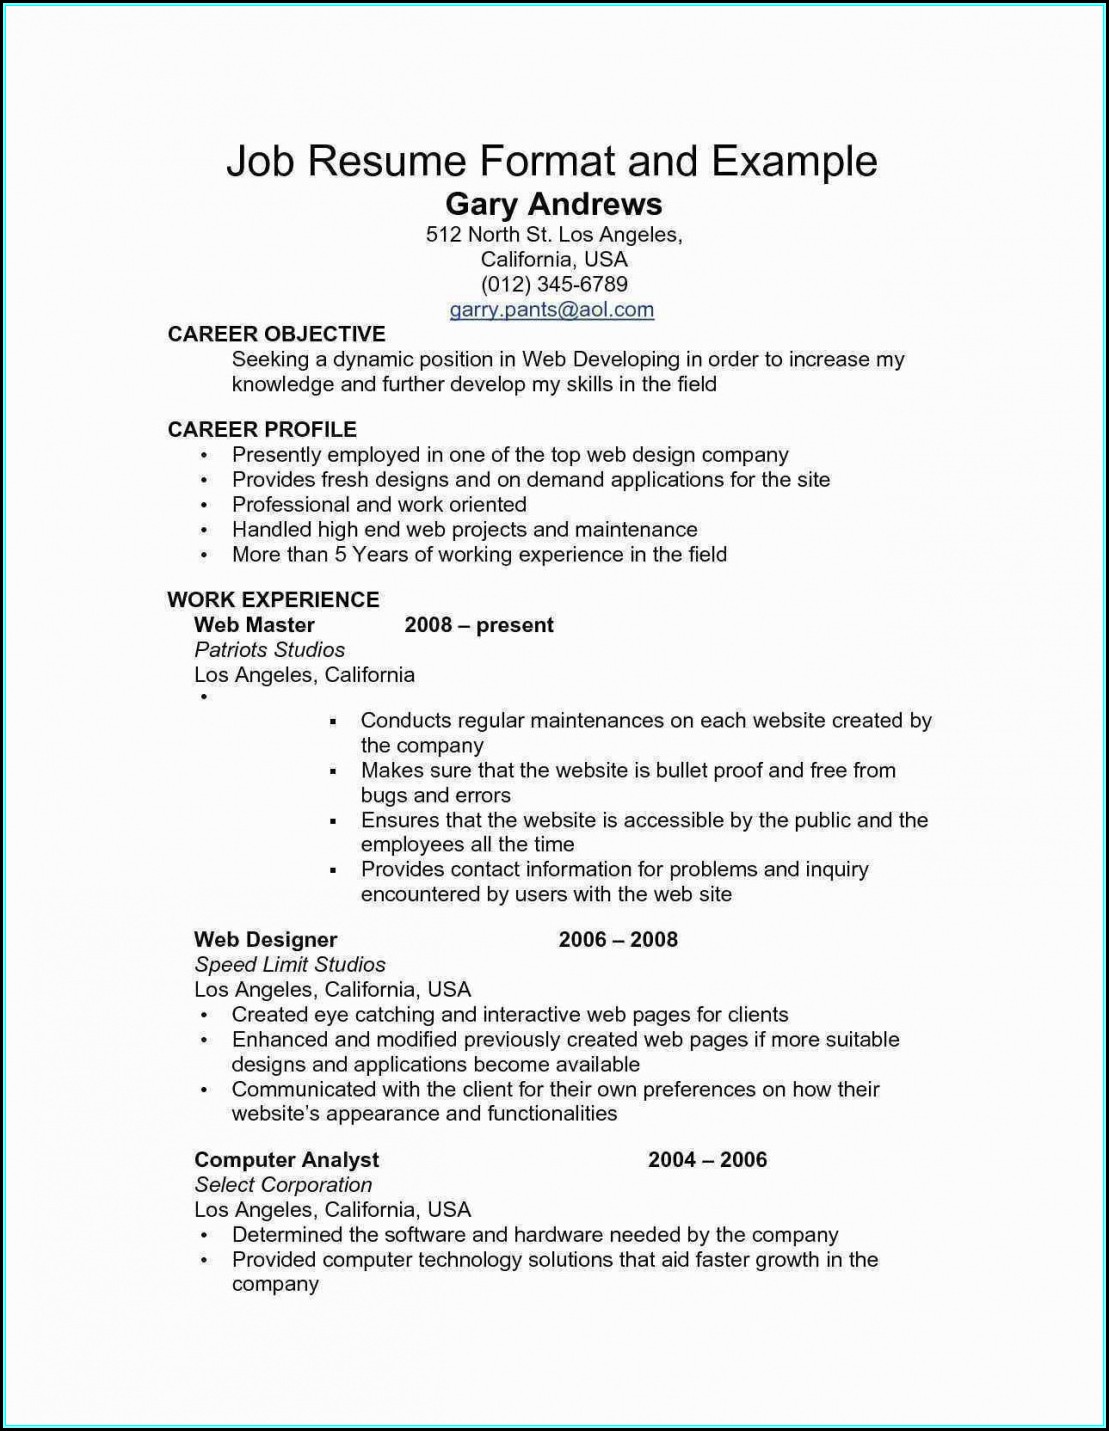 Resume For Federal Jobs